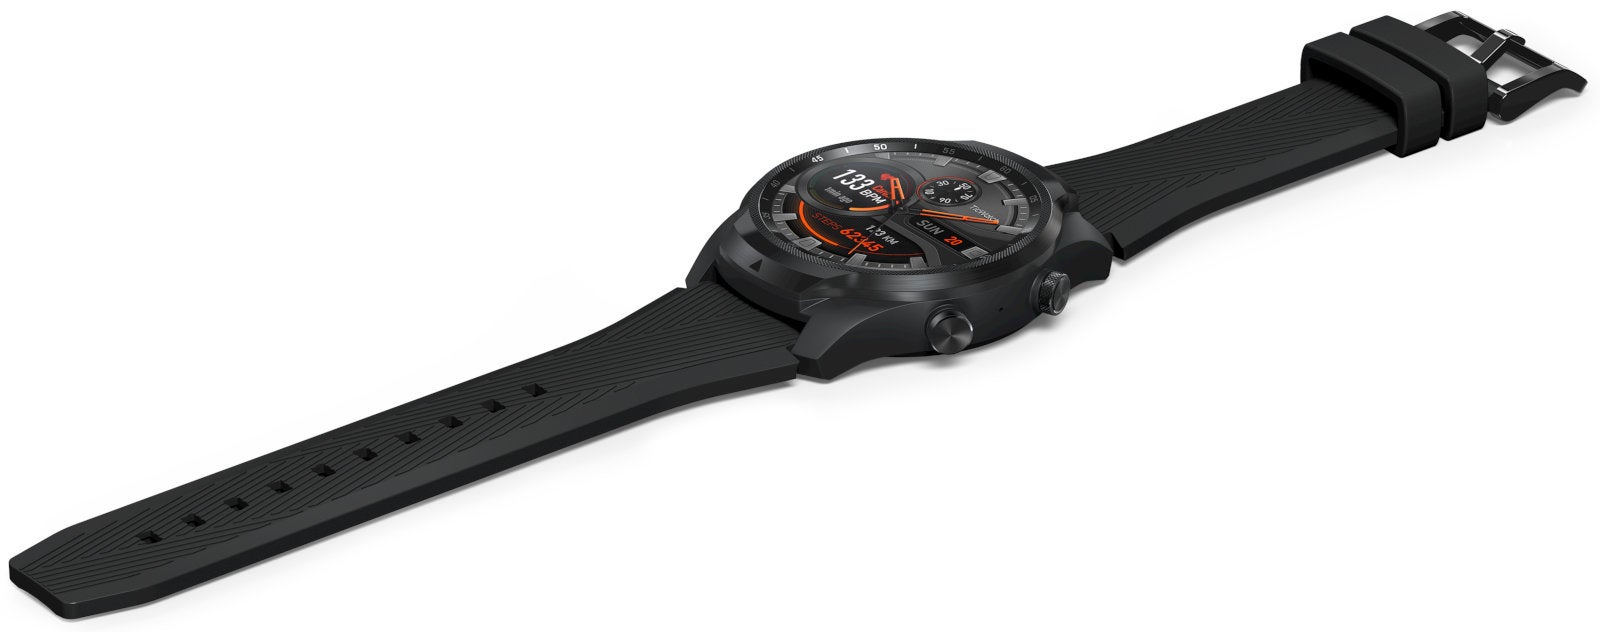 TicWatch Pro 4G LTE for Verizon goes official, Amazon will sell it